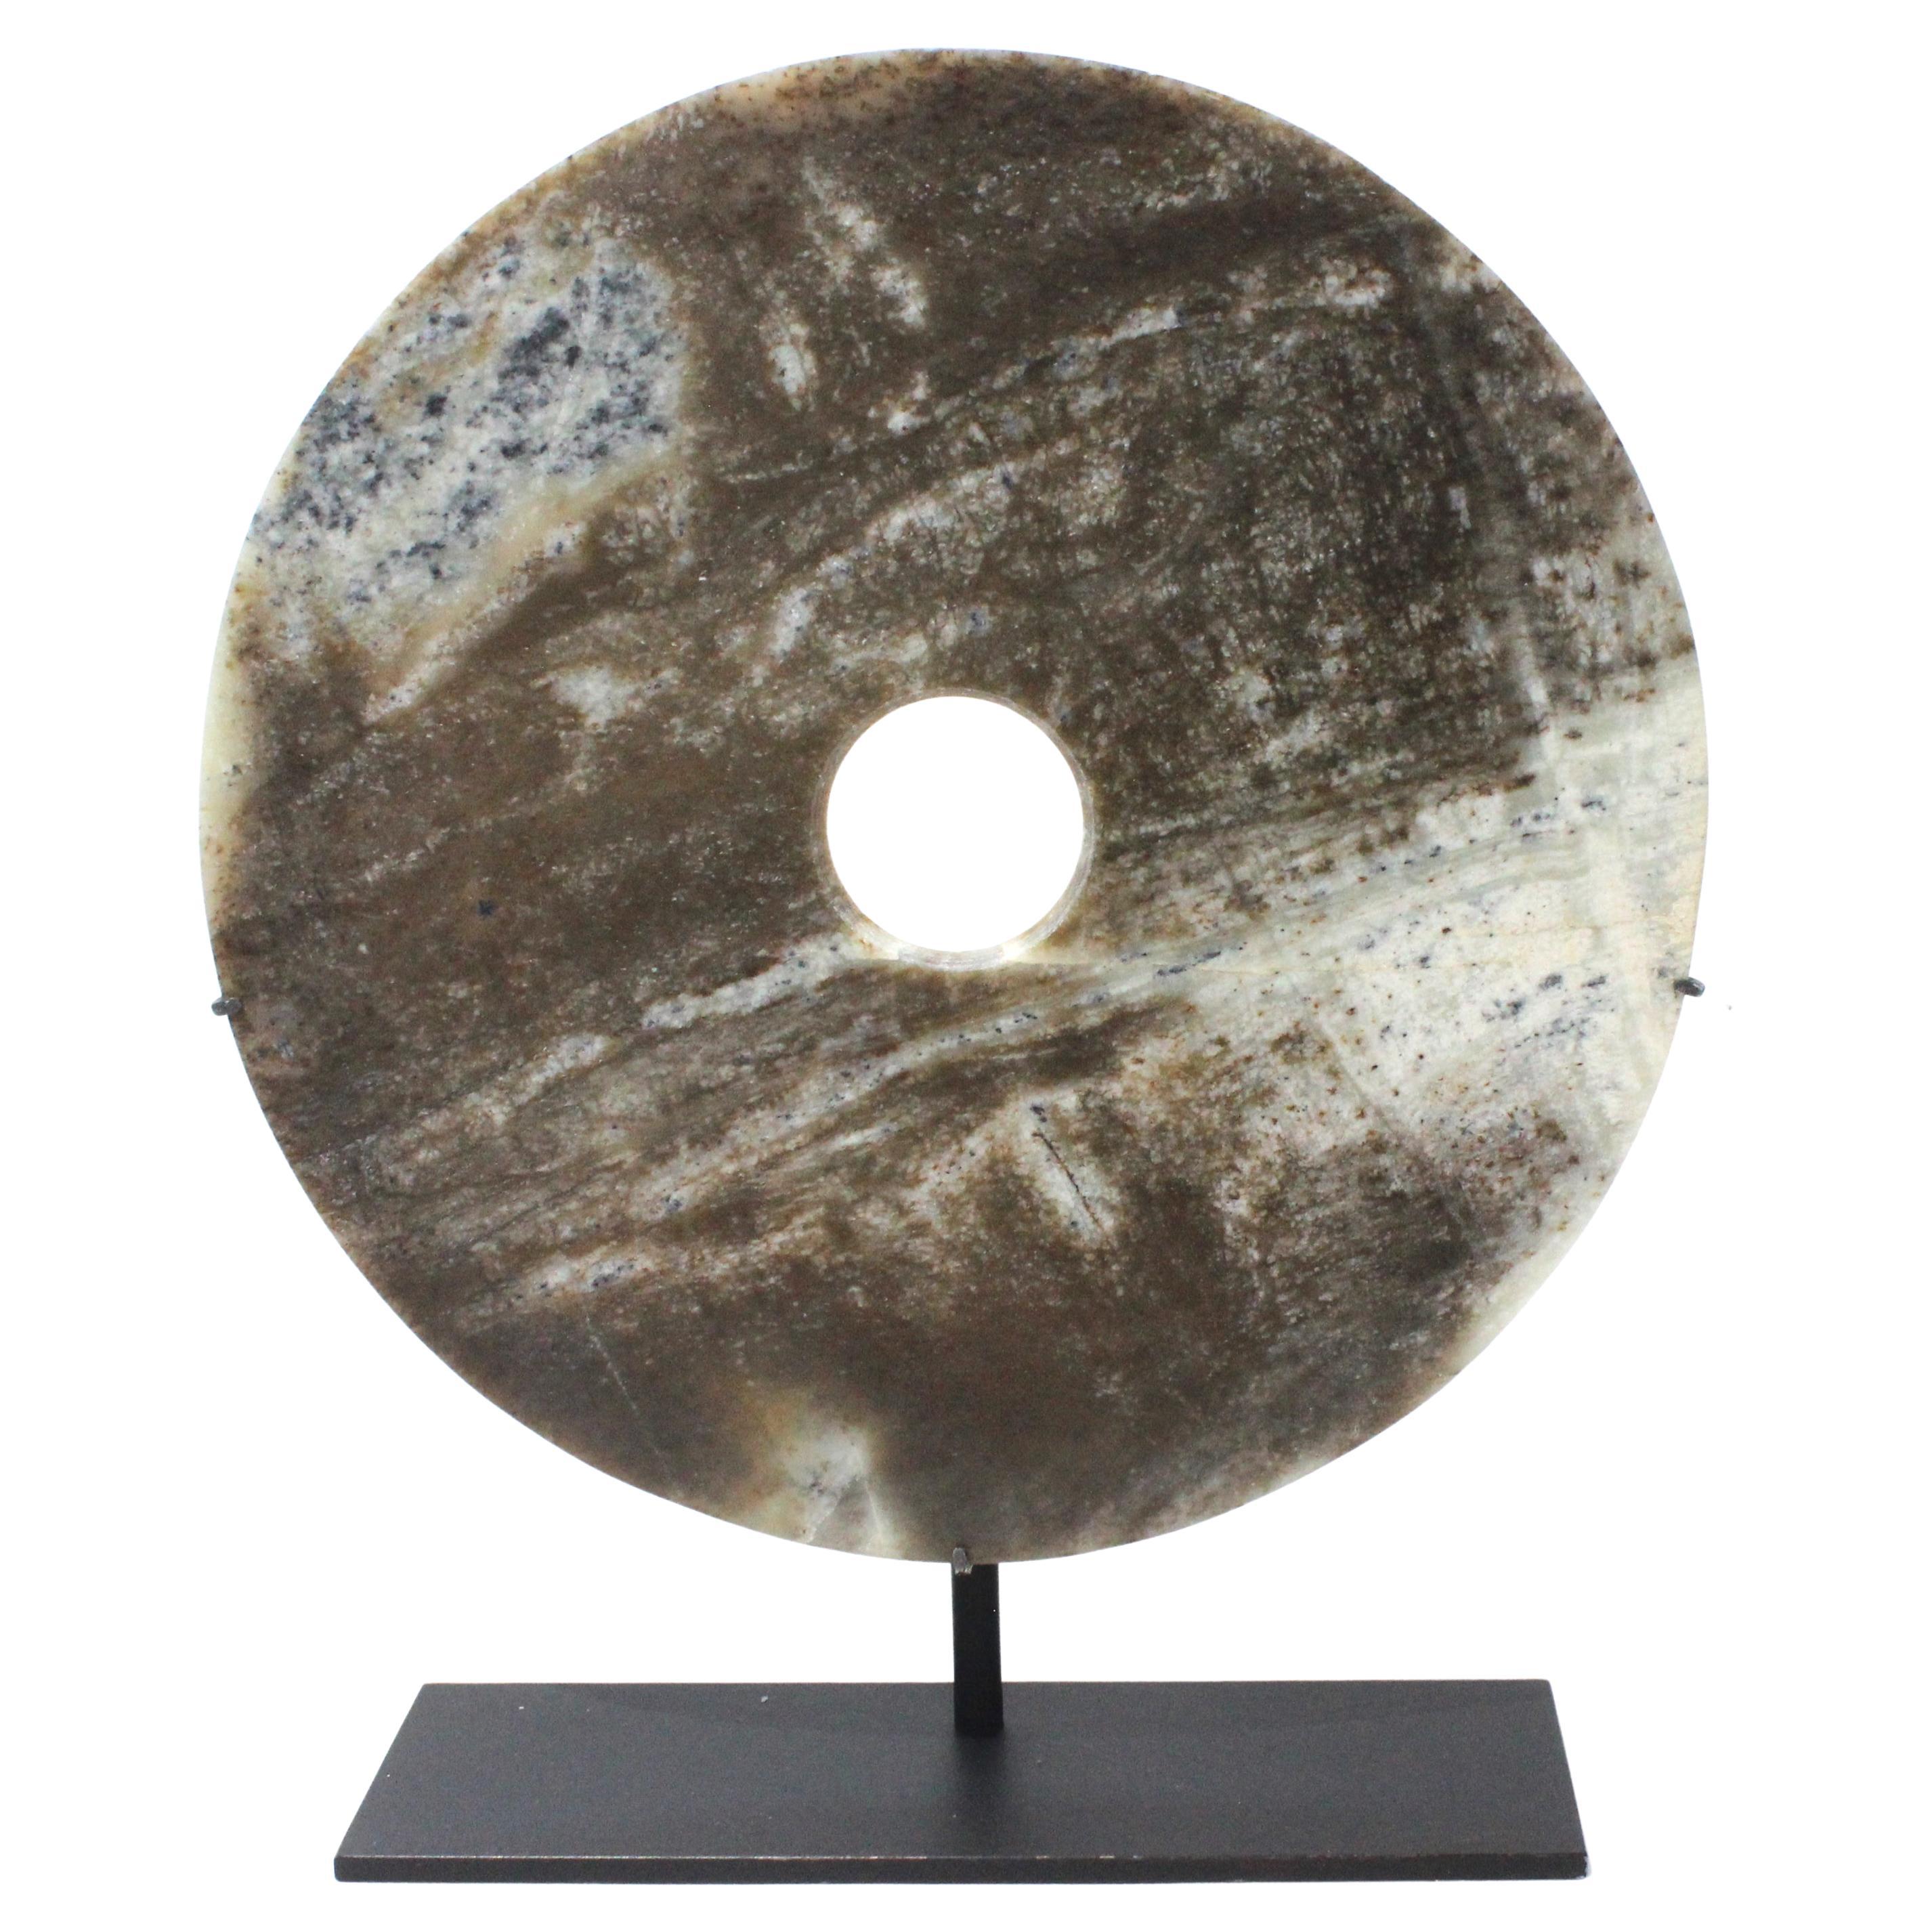 This stylish mounted jade disc will make a subtle statement with its form and use of materials. The stone has a mottled coloration of browns, charcoals, slate greens and antique creams. 

Note: overall dimensions are 15